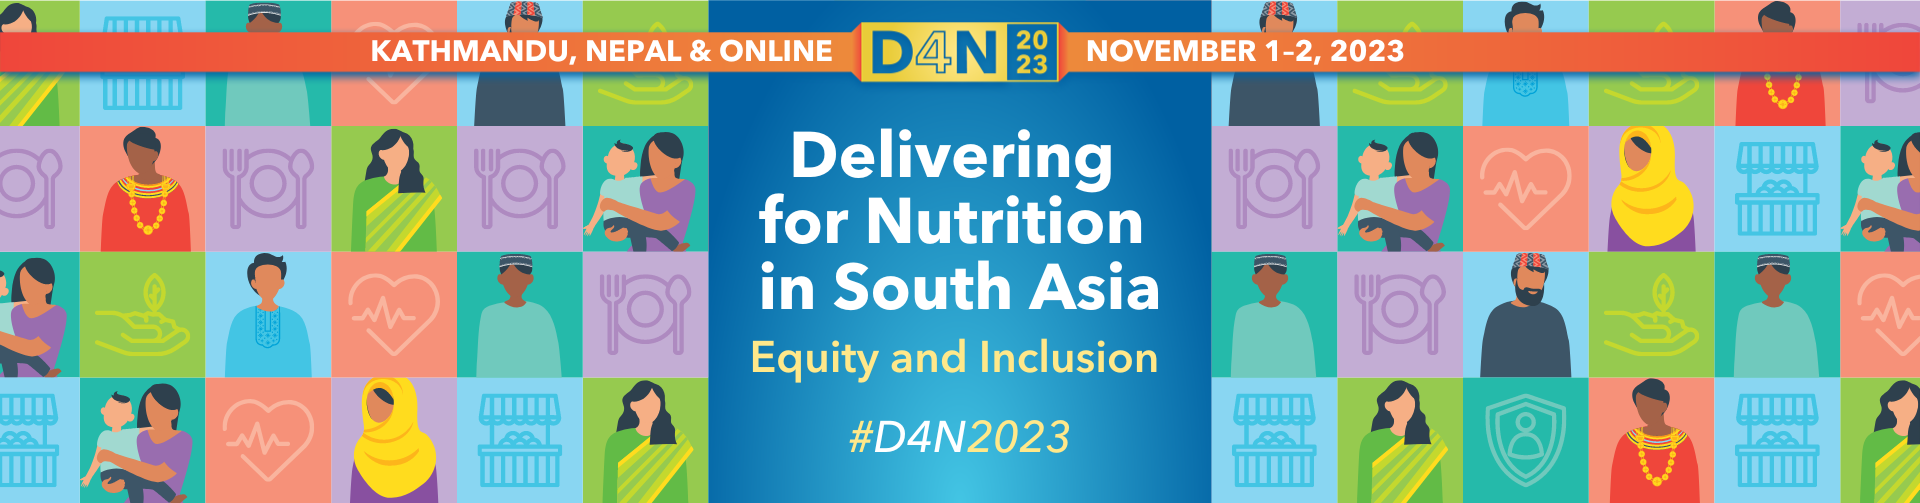 Delivering for Nutrition in South Asia: Equity and Inclusion Logistics